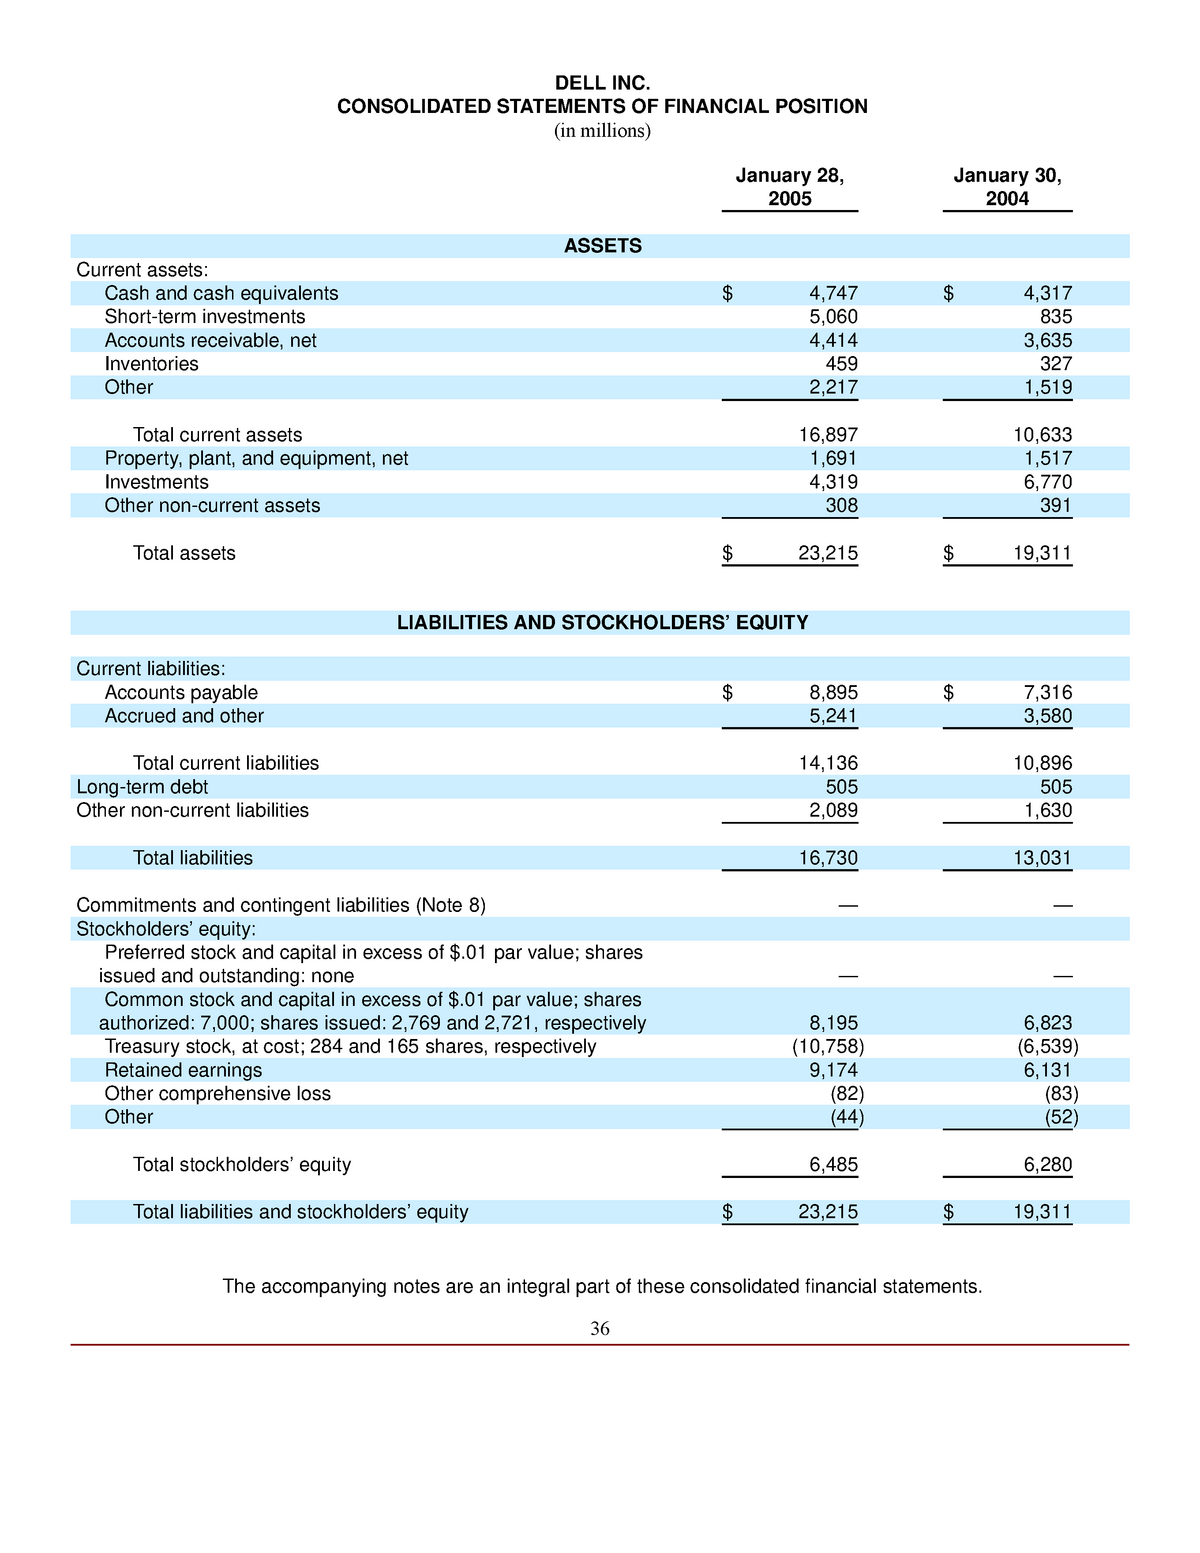 Practical dell inc. consolidated statements of financial position